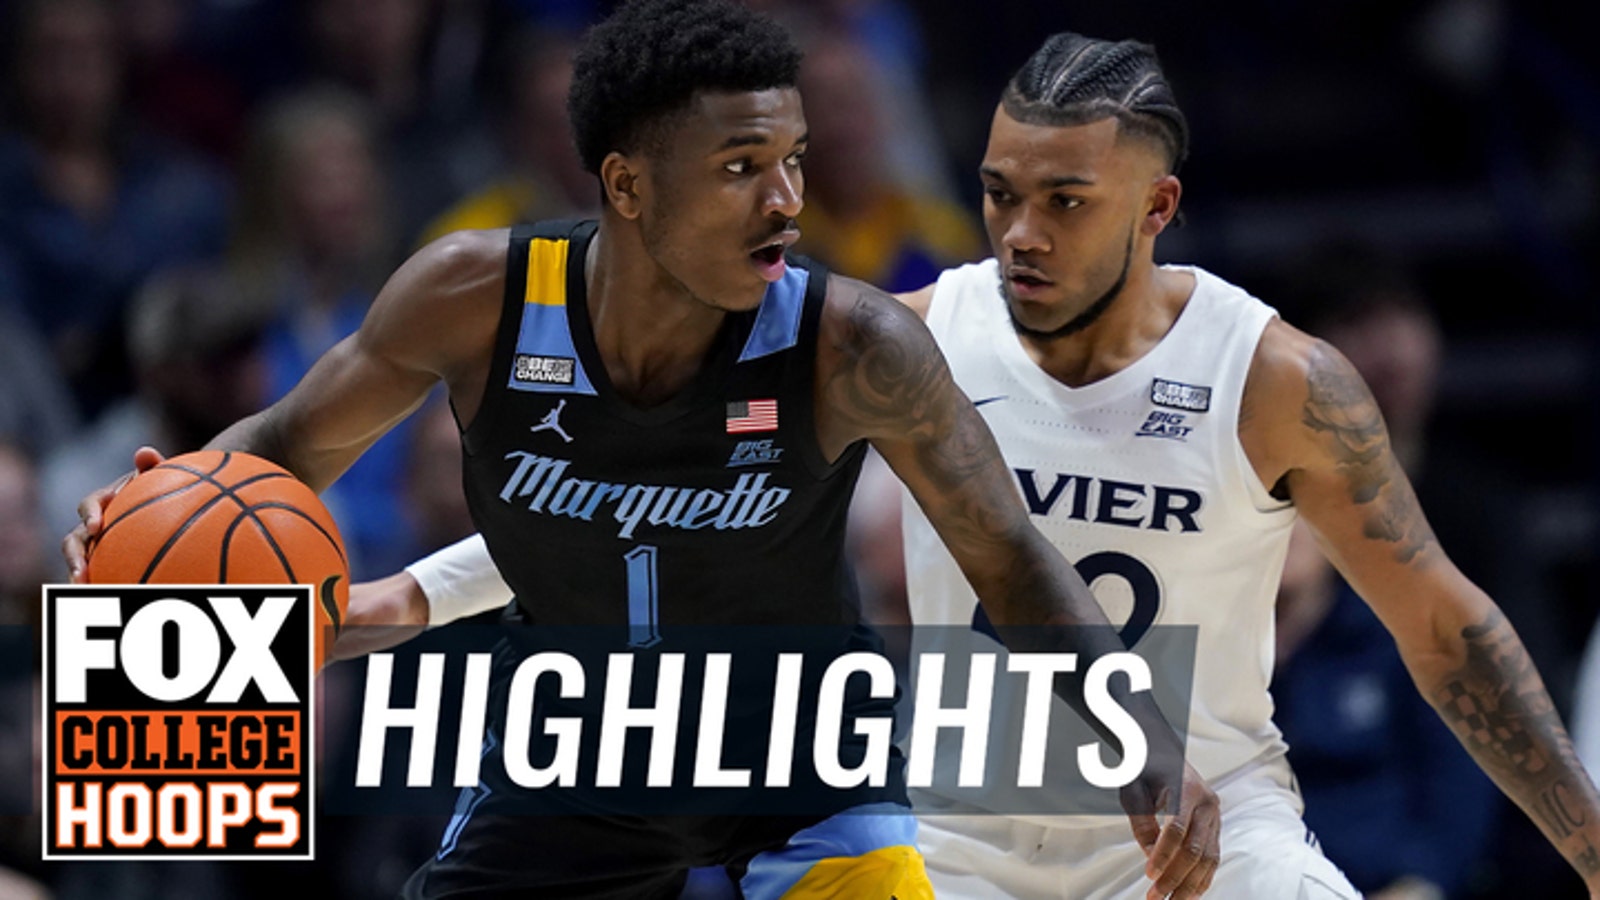 No. 8 Marquette Golden Eagles vs. Xavier Musketeers Highlights